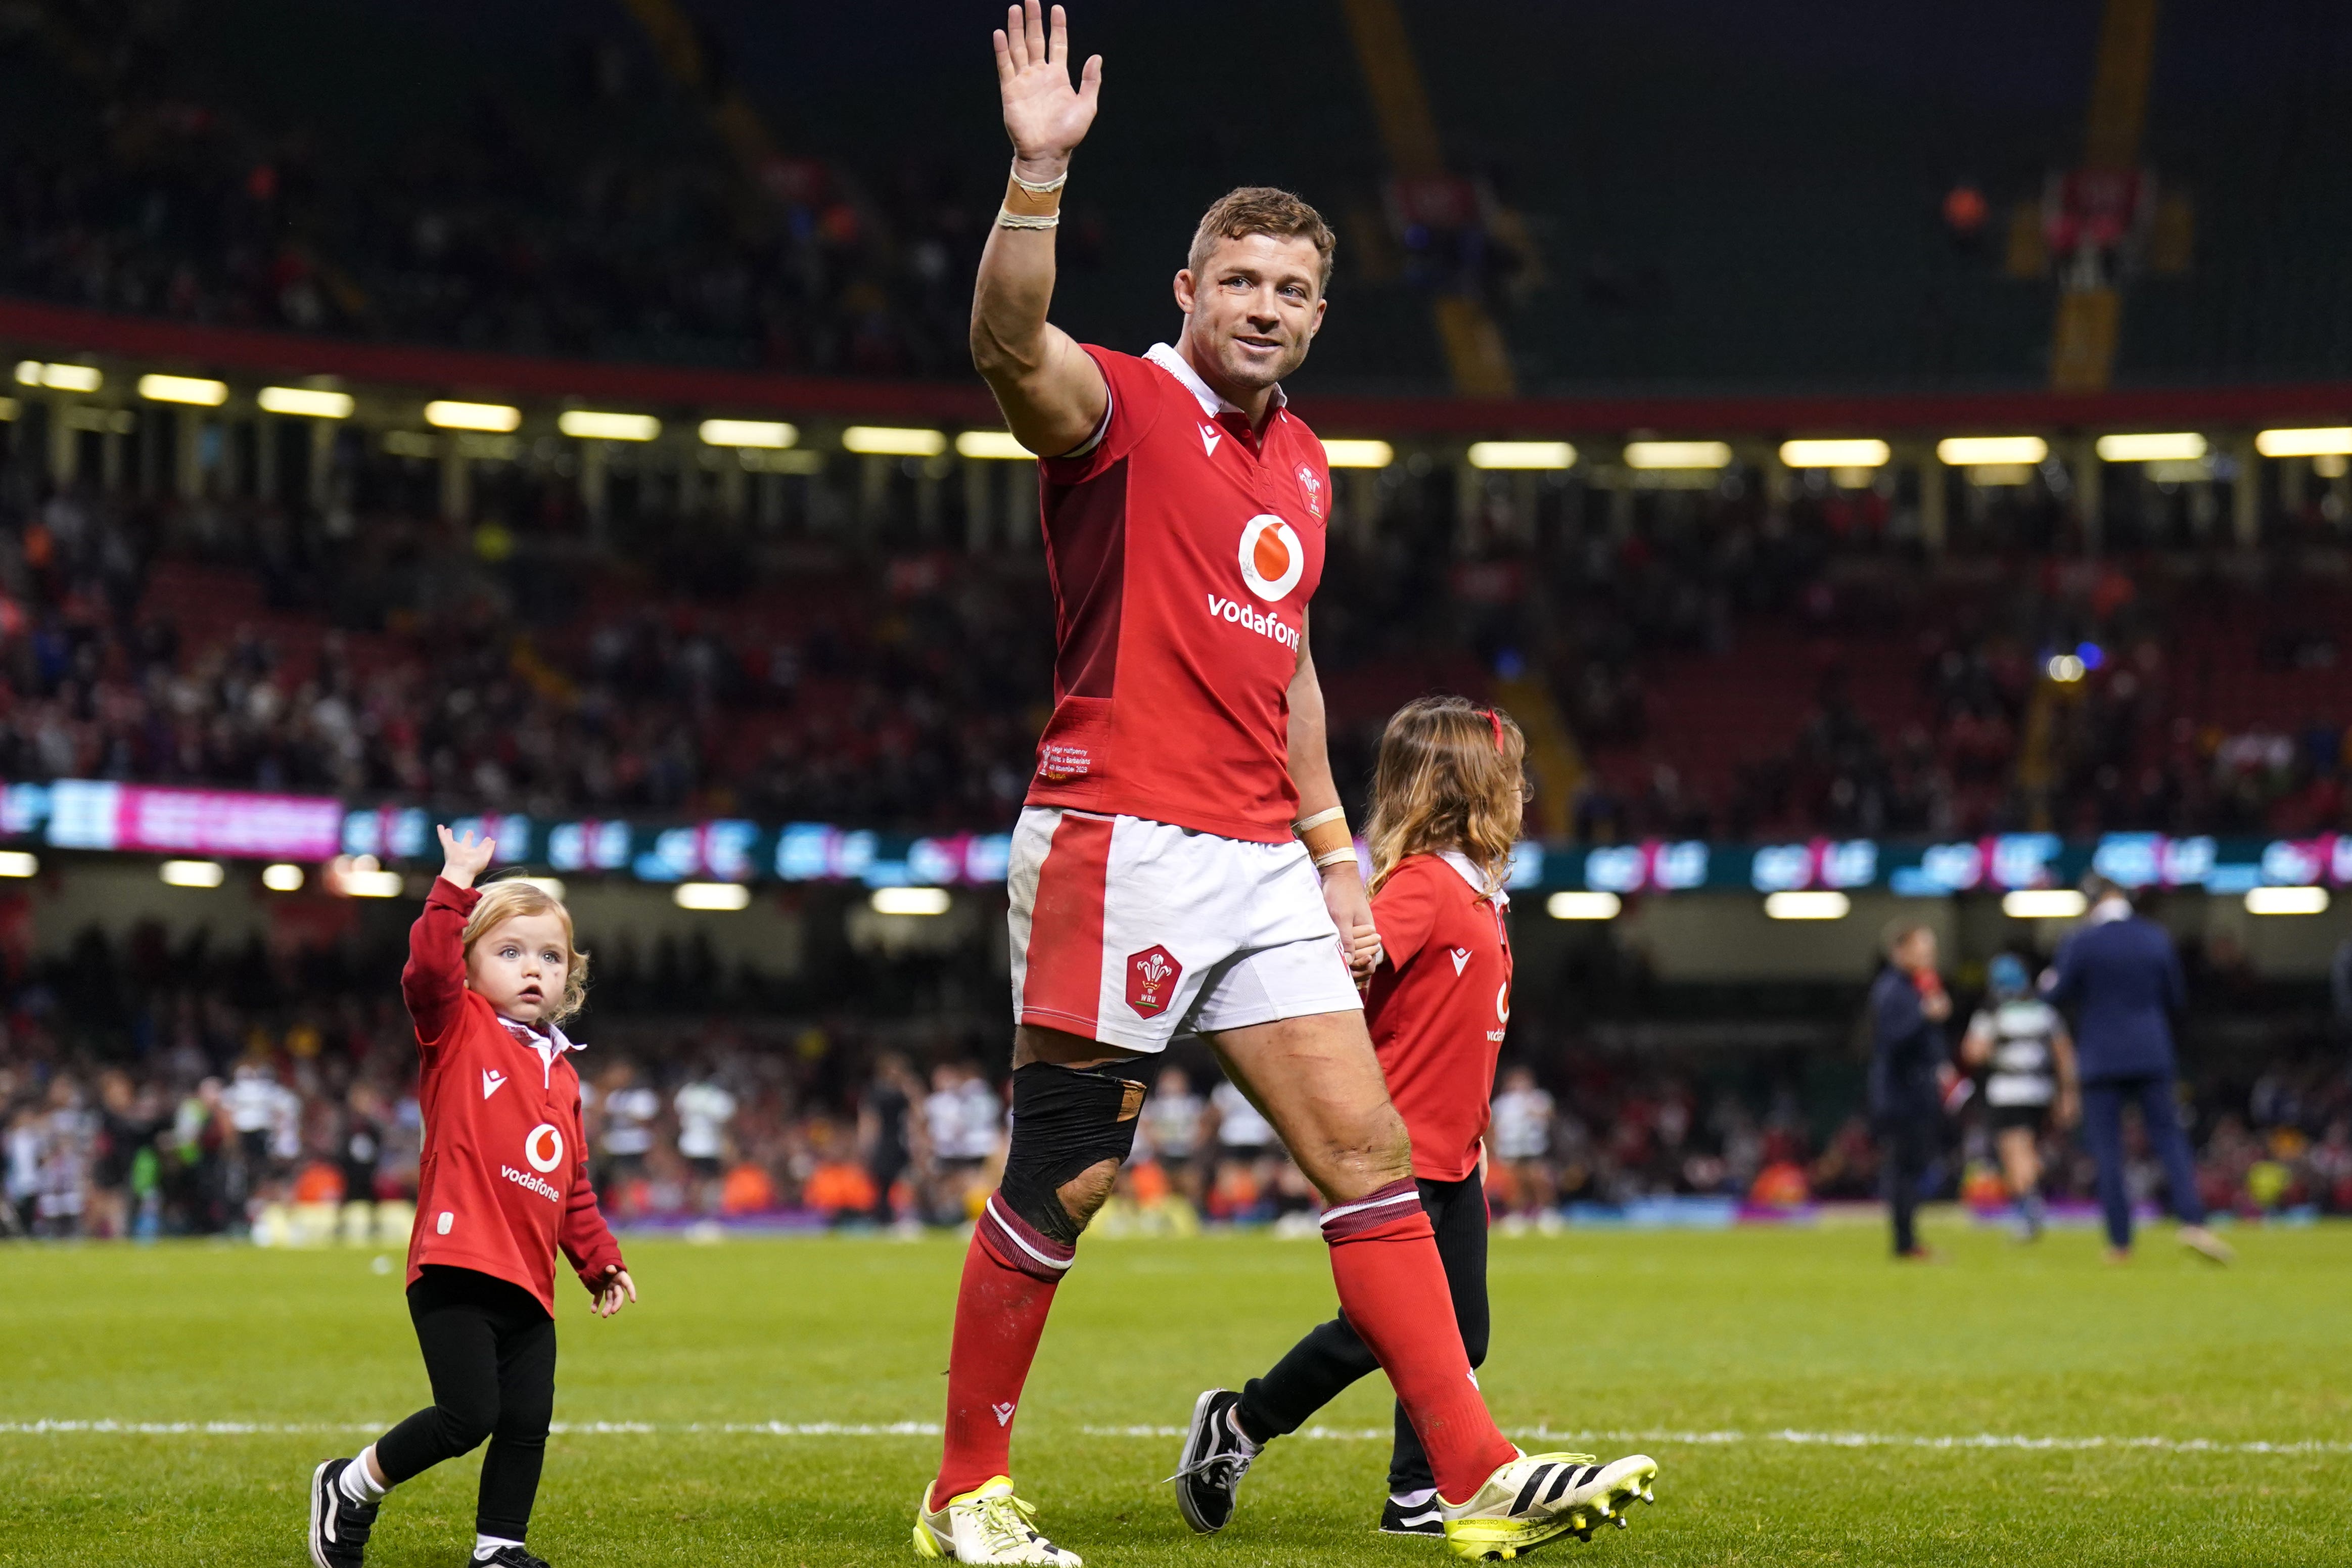 Leigh Halfpenny waves to fans following his final Wales appearance in the 49-26 win over the Barbarians (Joe Giddens/PA).